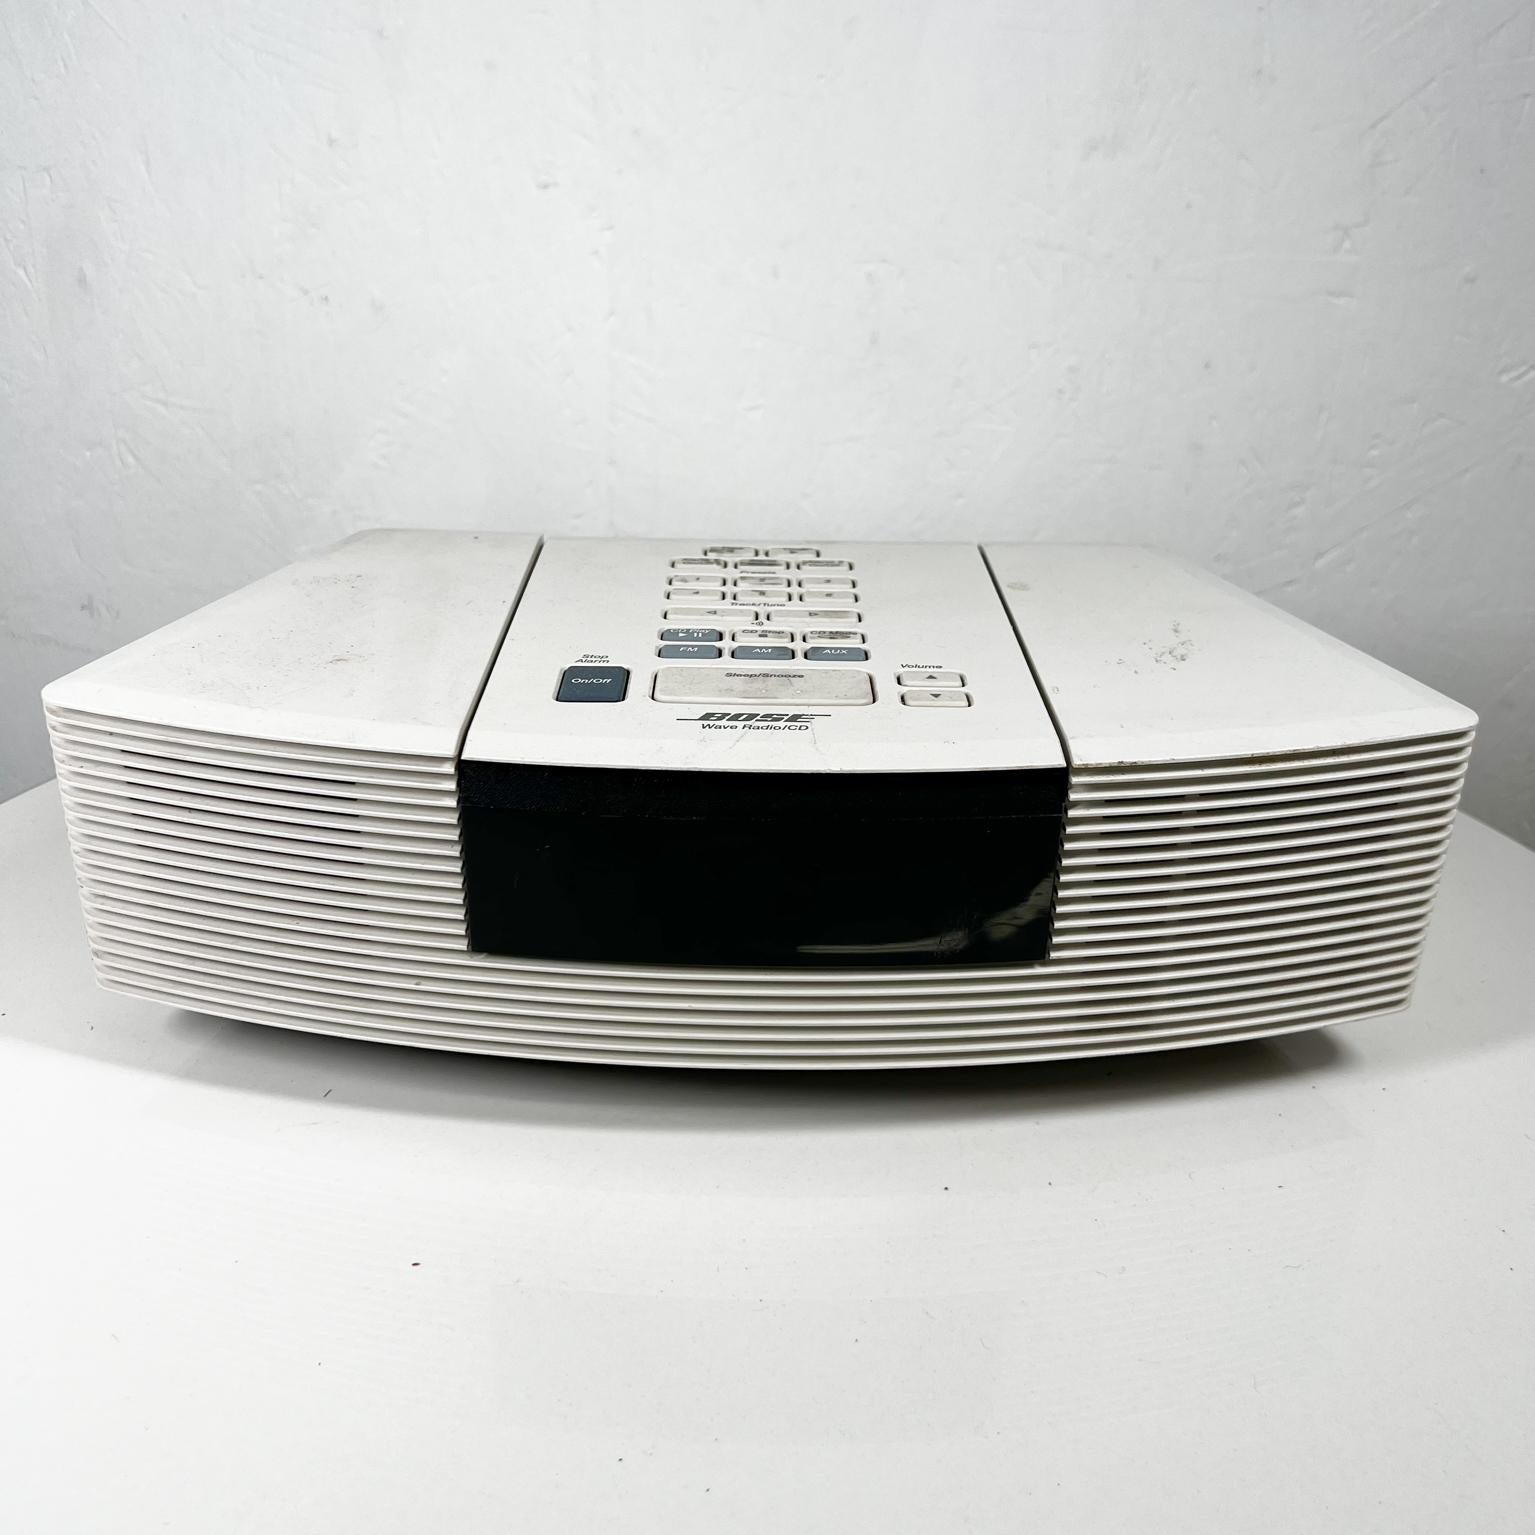 Bose CD Player Wave Radio
14 x 8.38 d x 4.38 h
Preowned vintage working condition. 
No remote.
See images listed.